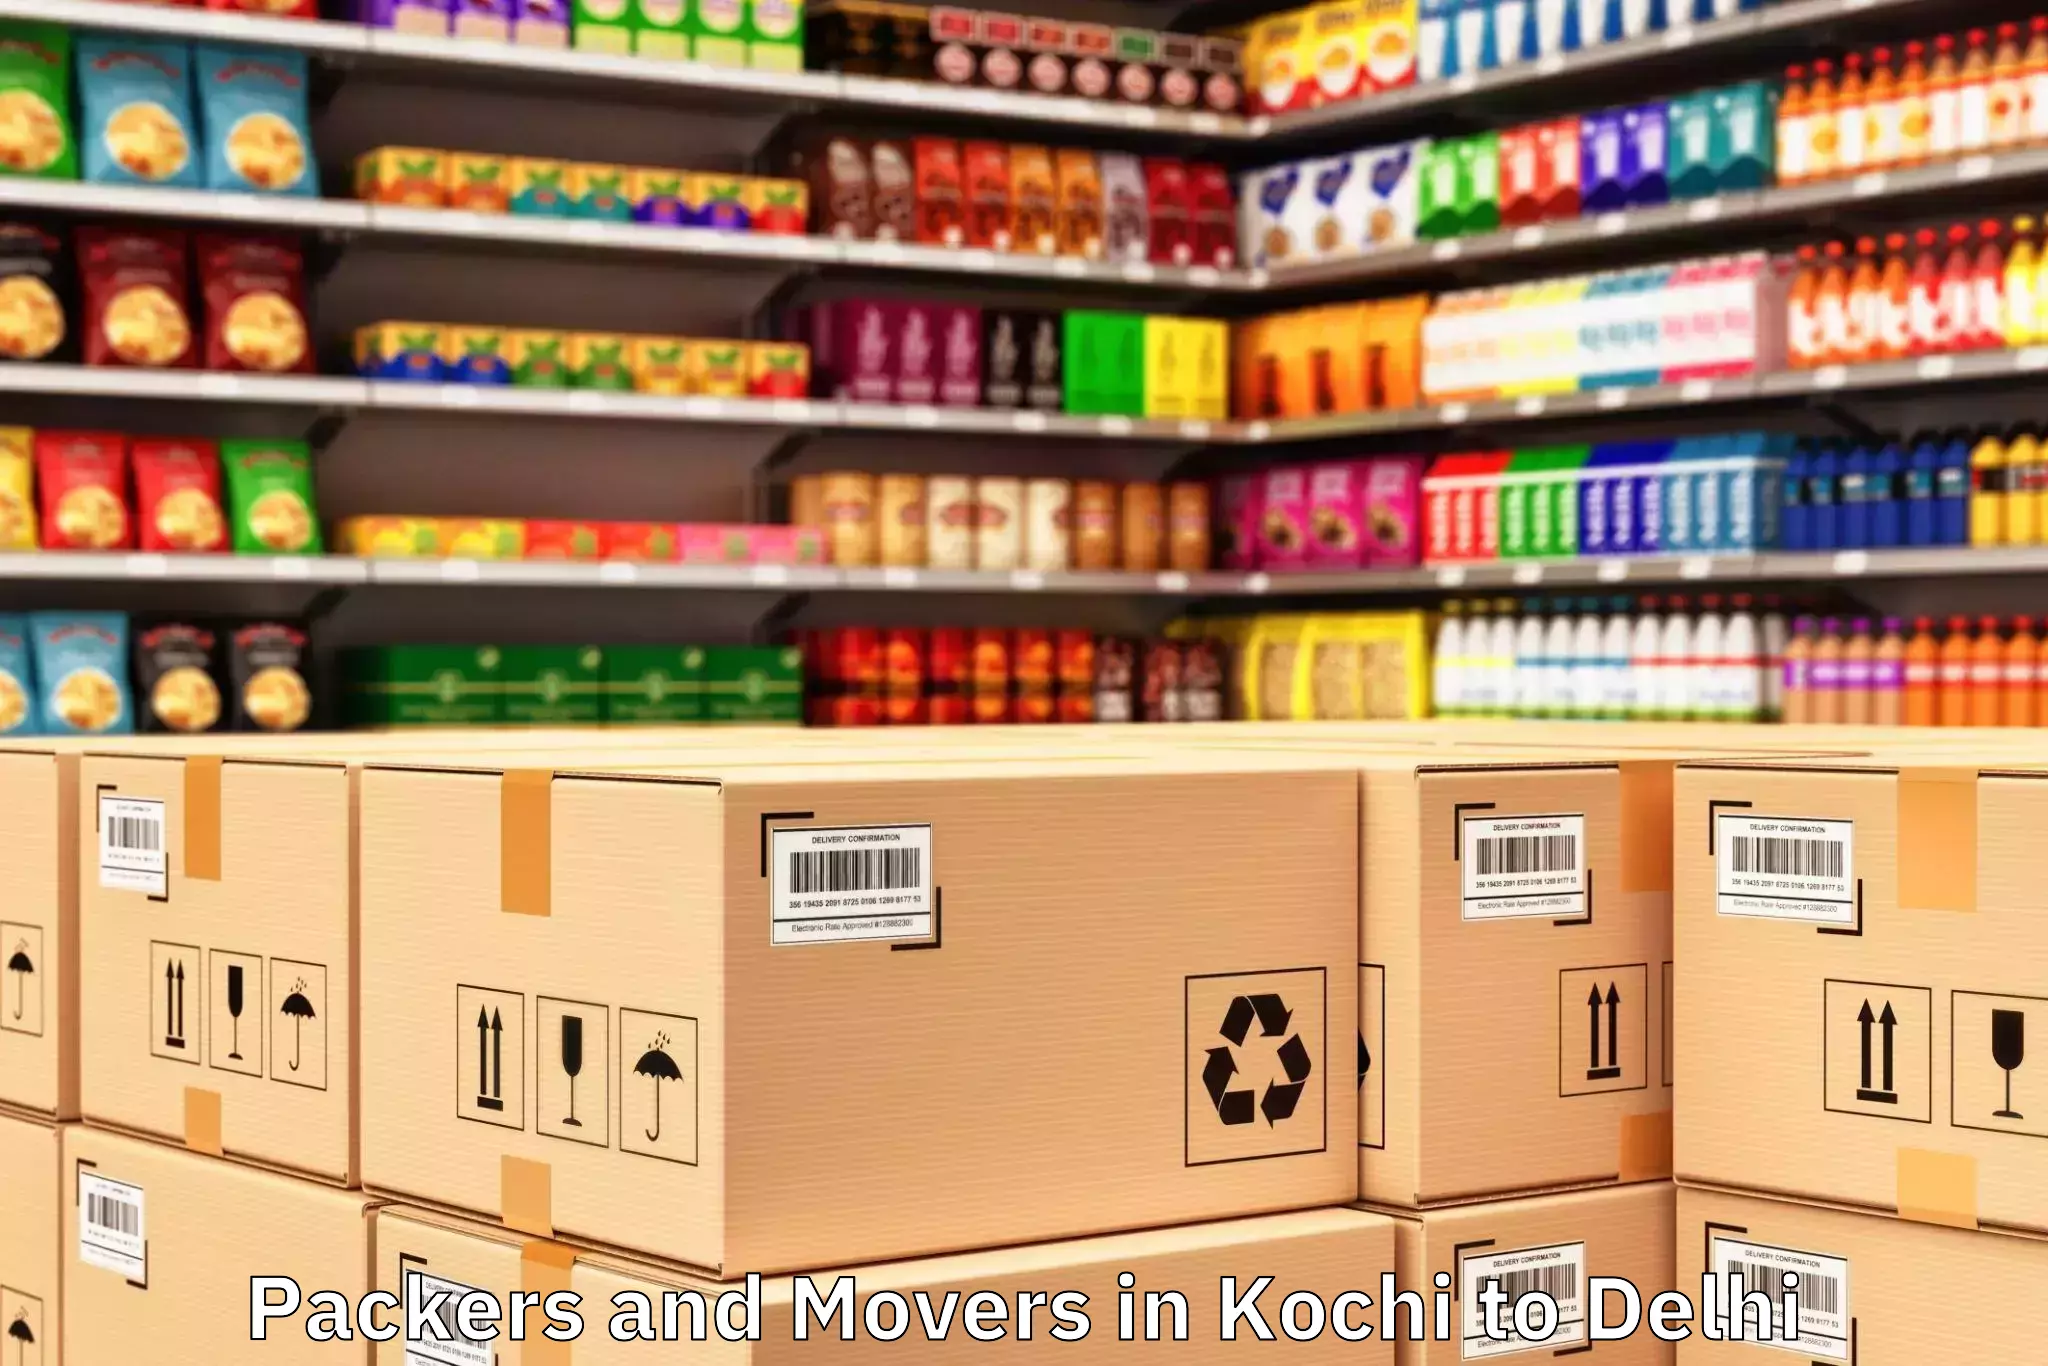 Comprehensive Kochi to Unity One Mall Janakpuri Packers And Movers